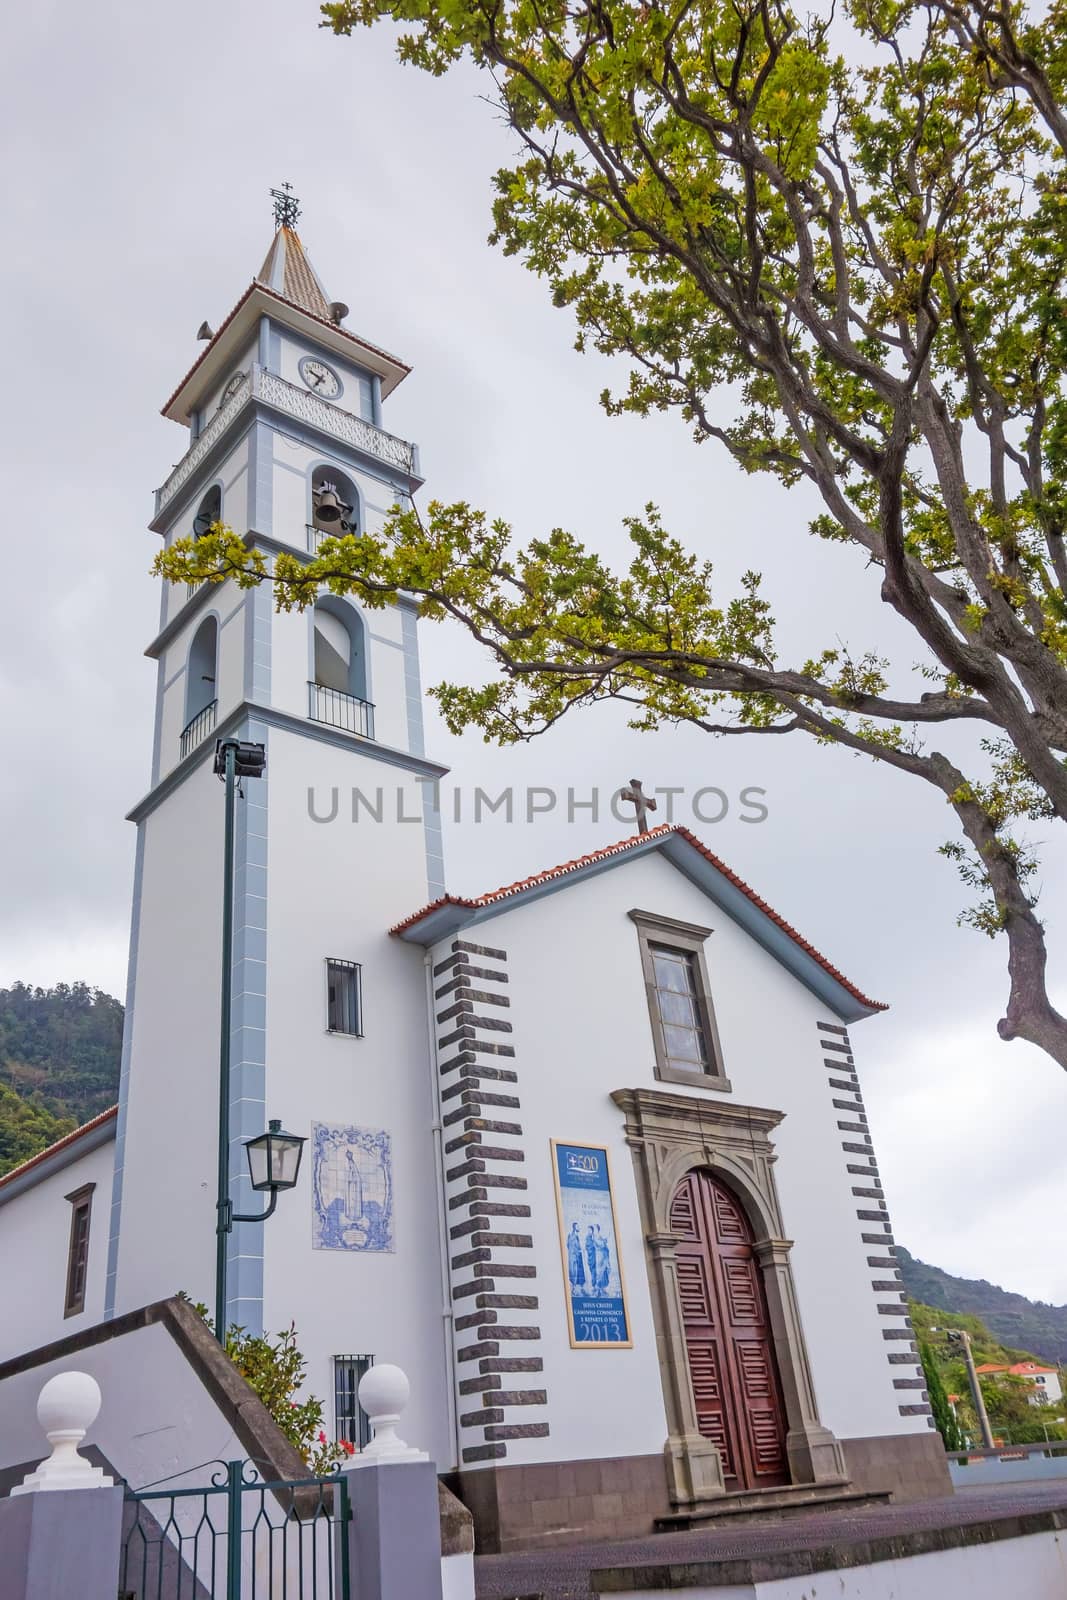 Faial, Portugal - June 7, 2013: Church of Faial, Cemiterio do Faial (Cemetery of Faial). The church with cemetery is located in the center of the village Faial.